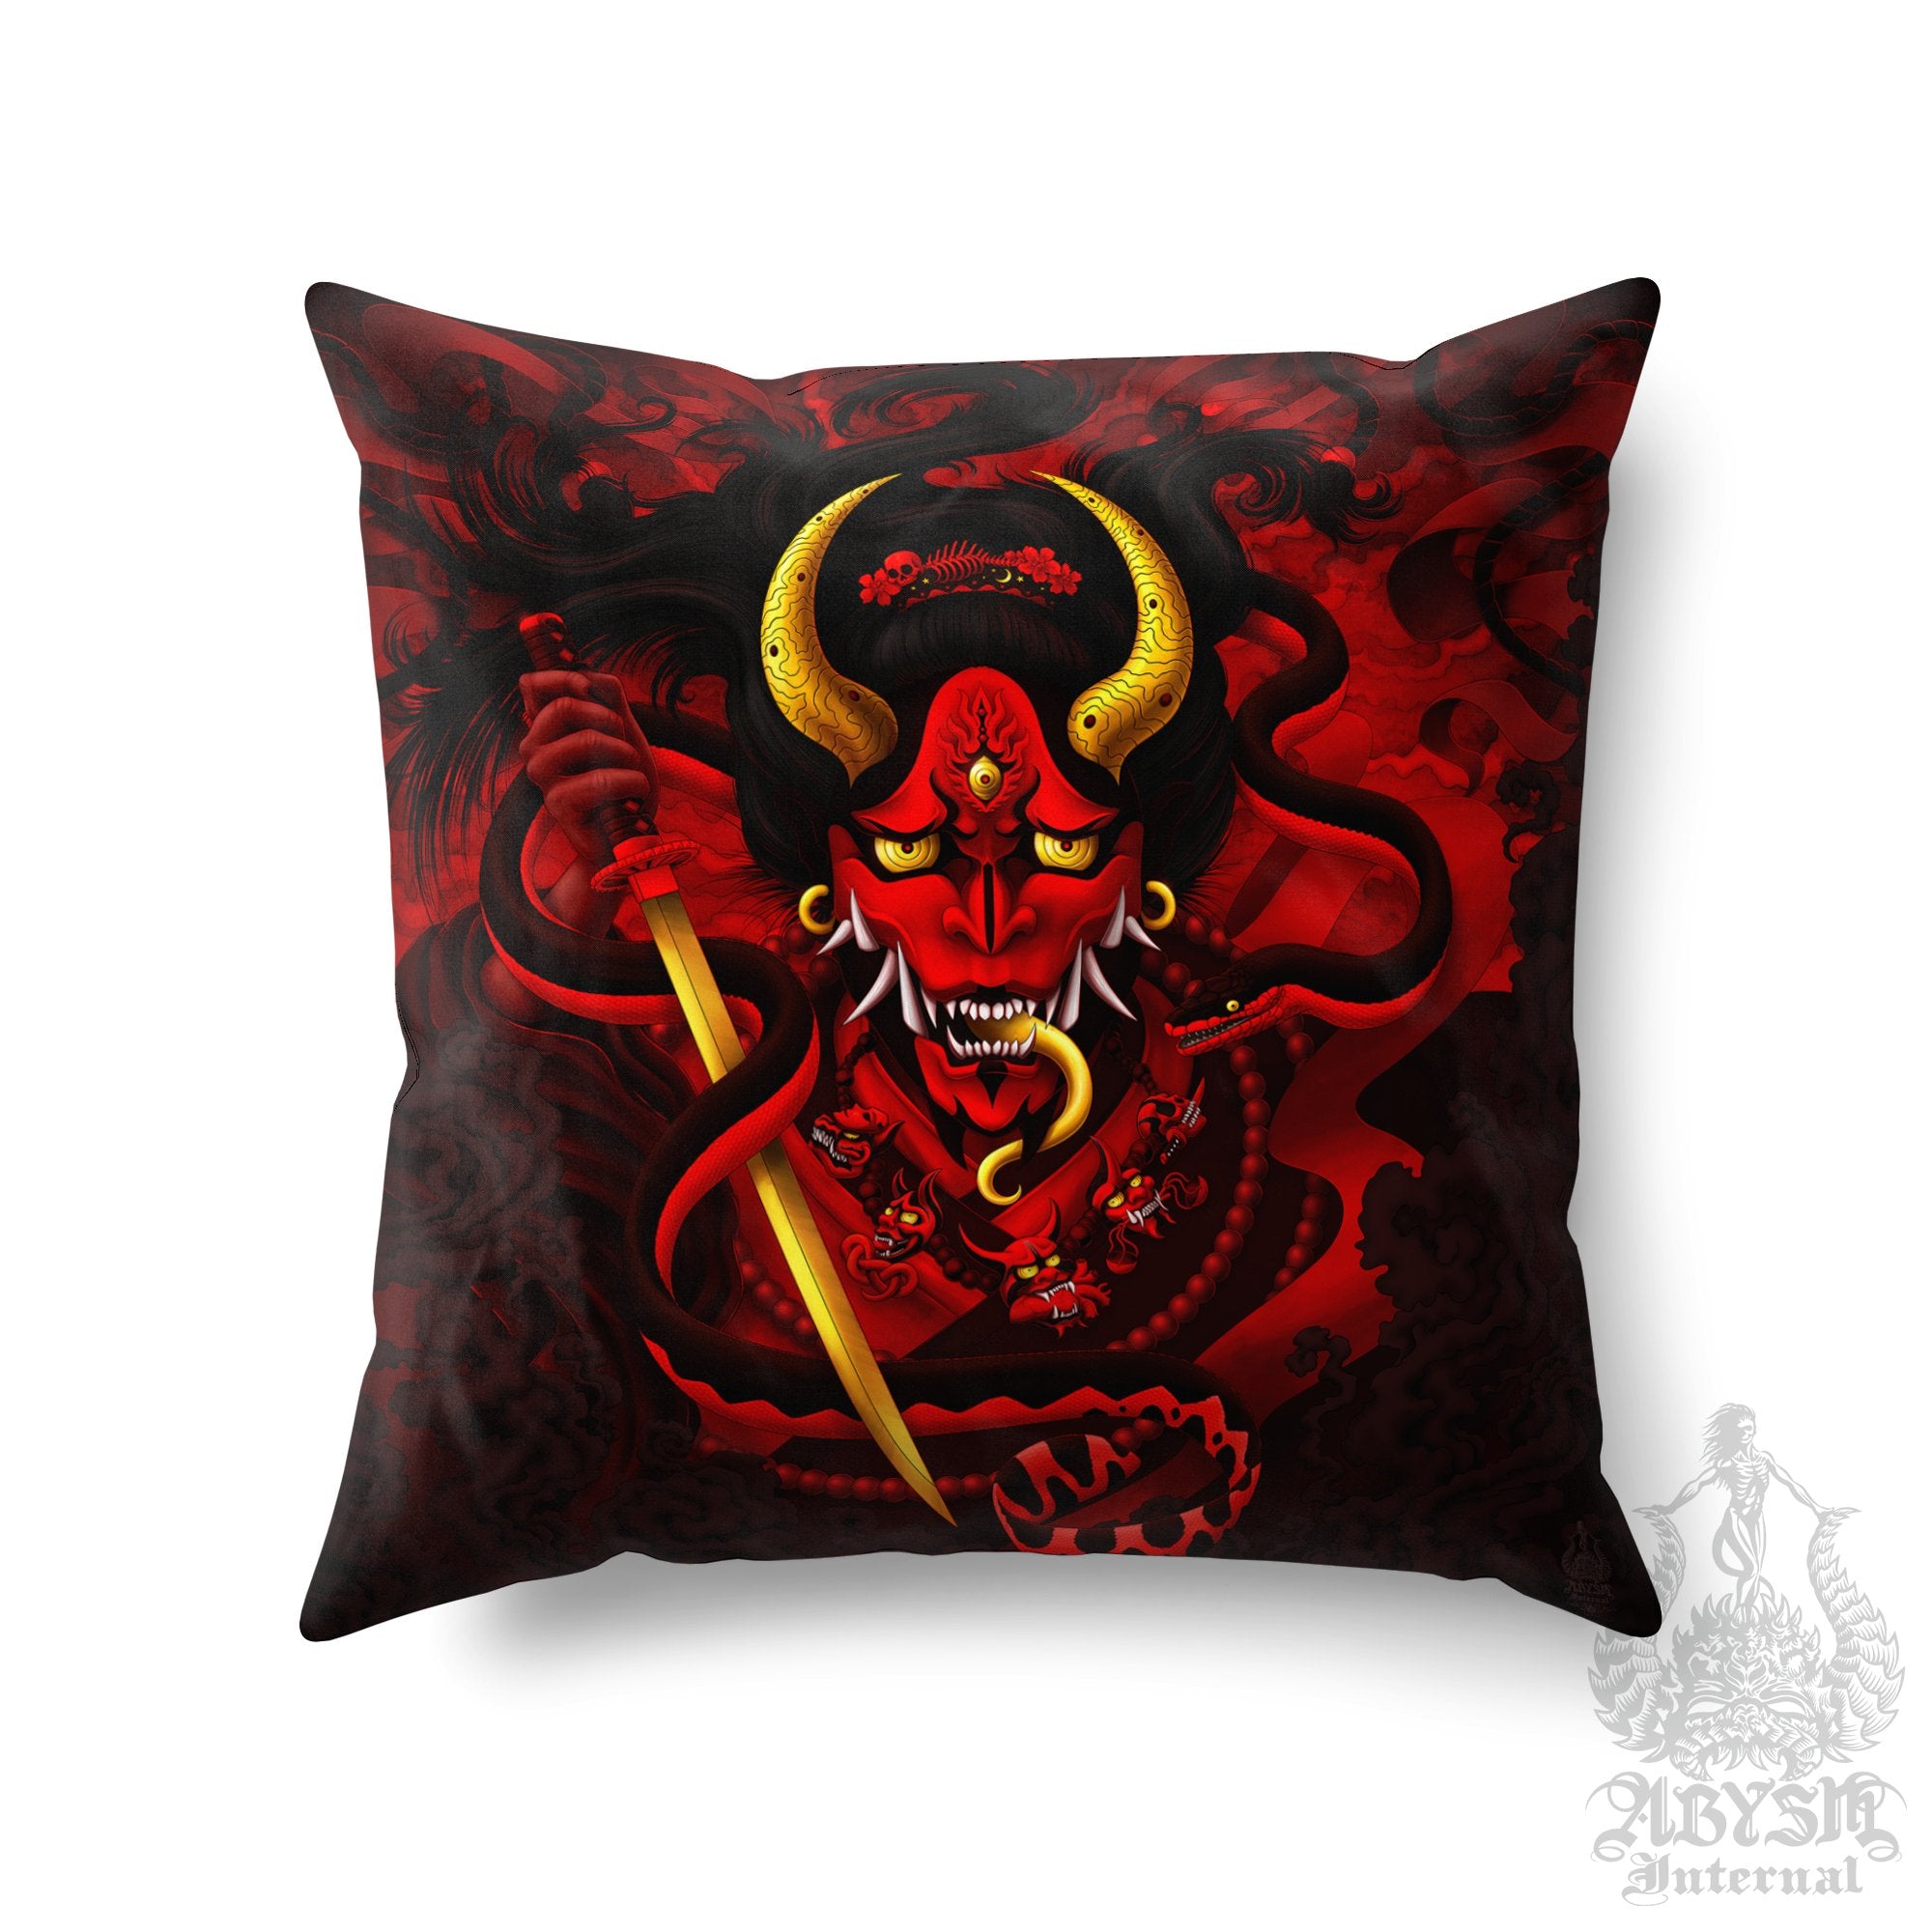 Bloody Gothic Hannya Throw Pillow, Decorative Accent Pillow, Square Cushion Cover, Japanese Demon & Red Snake, Goth Gamer Room Decor - Abysm Internal